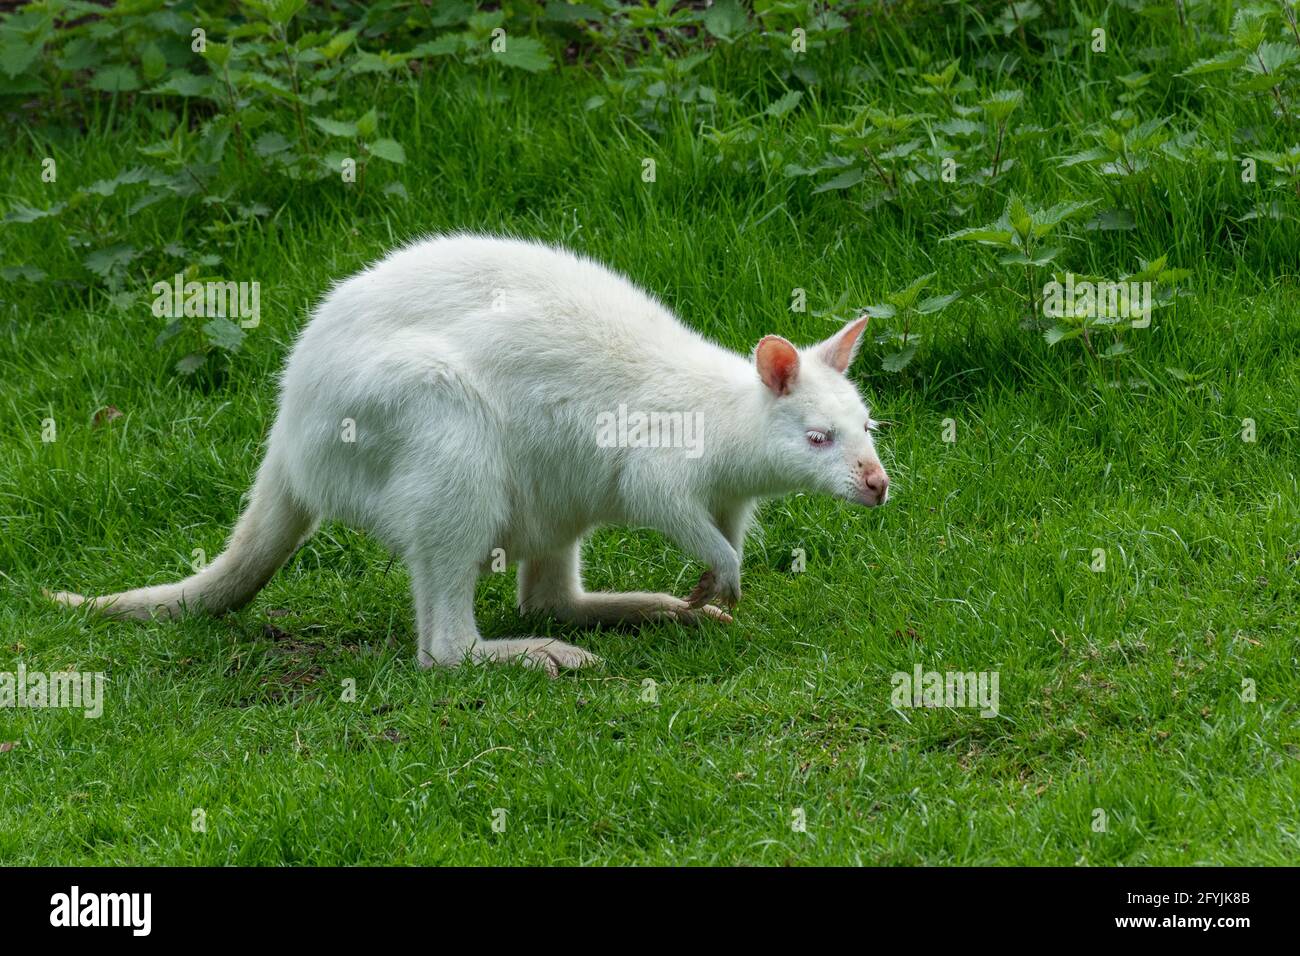 Bennett's wallaby (Macropus rufogriseus), also called red-necked wallaby, an albino marsupial animal Stock Photo